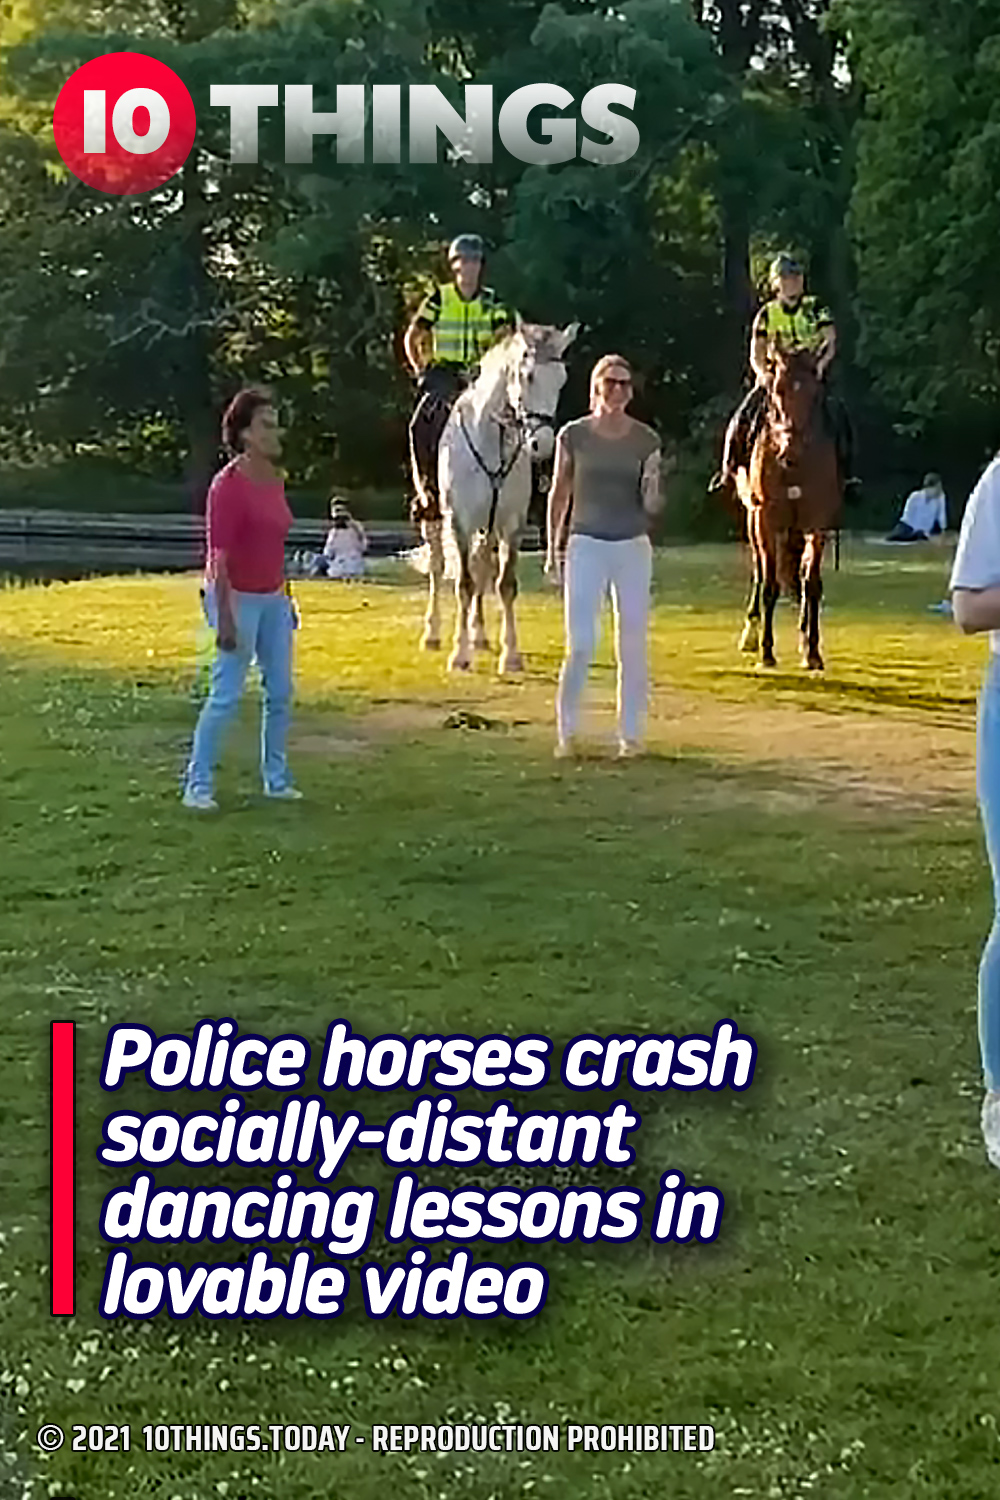 Police horses crash socially-distant dancing lessons in lovable video